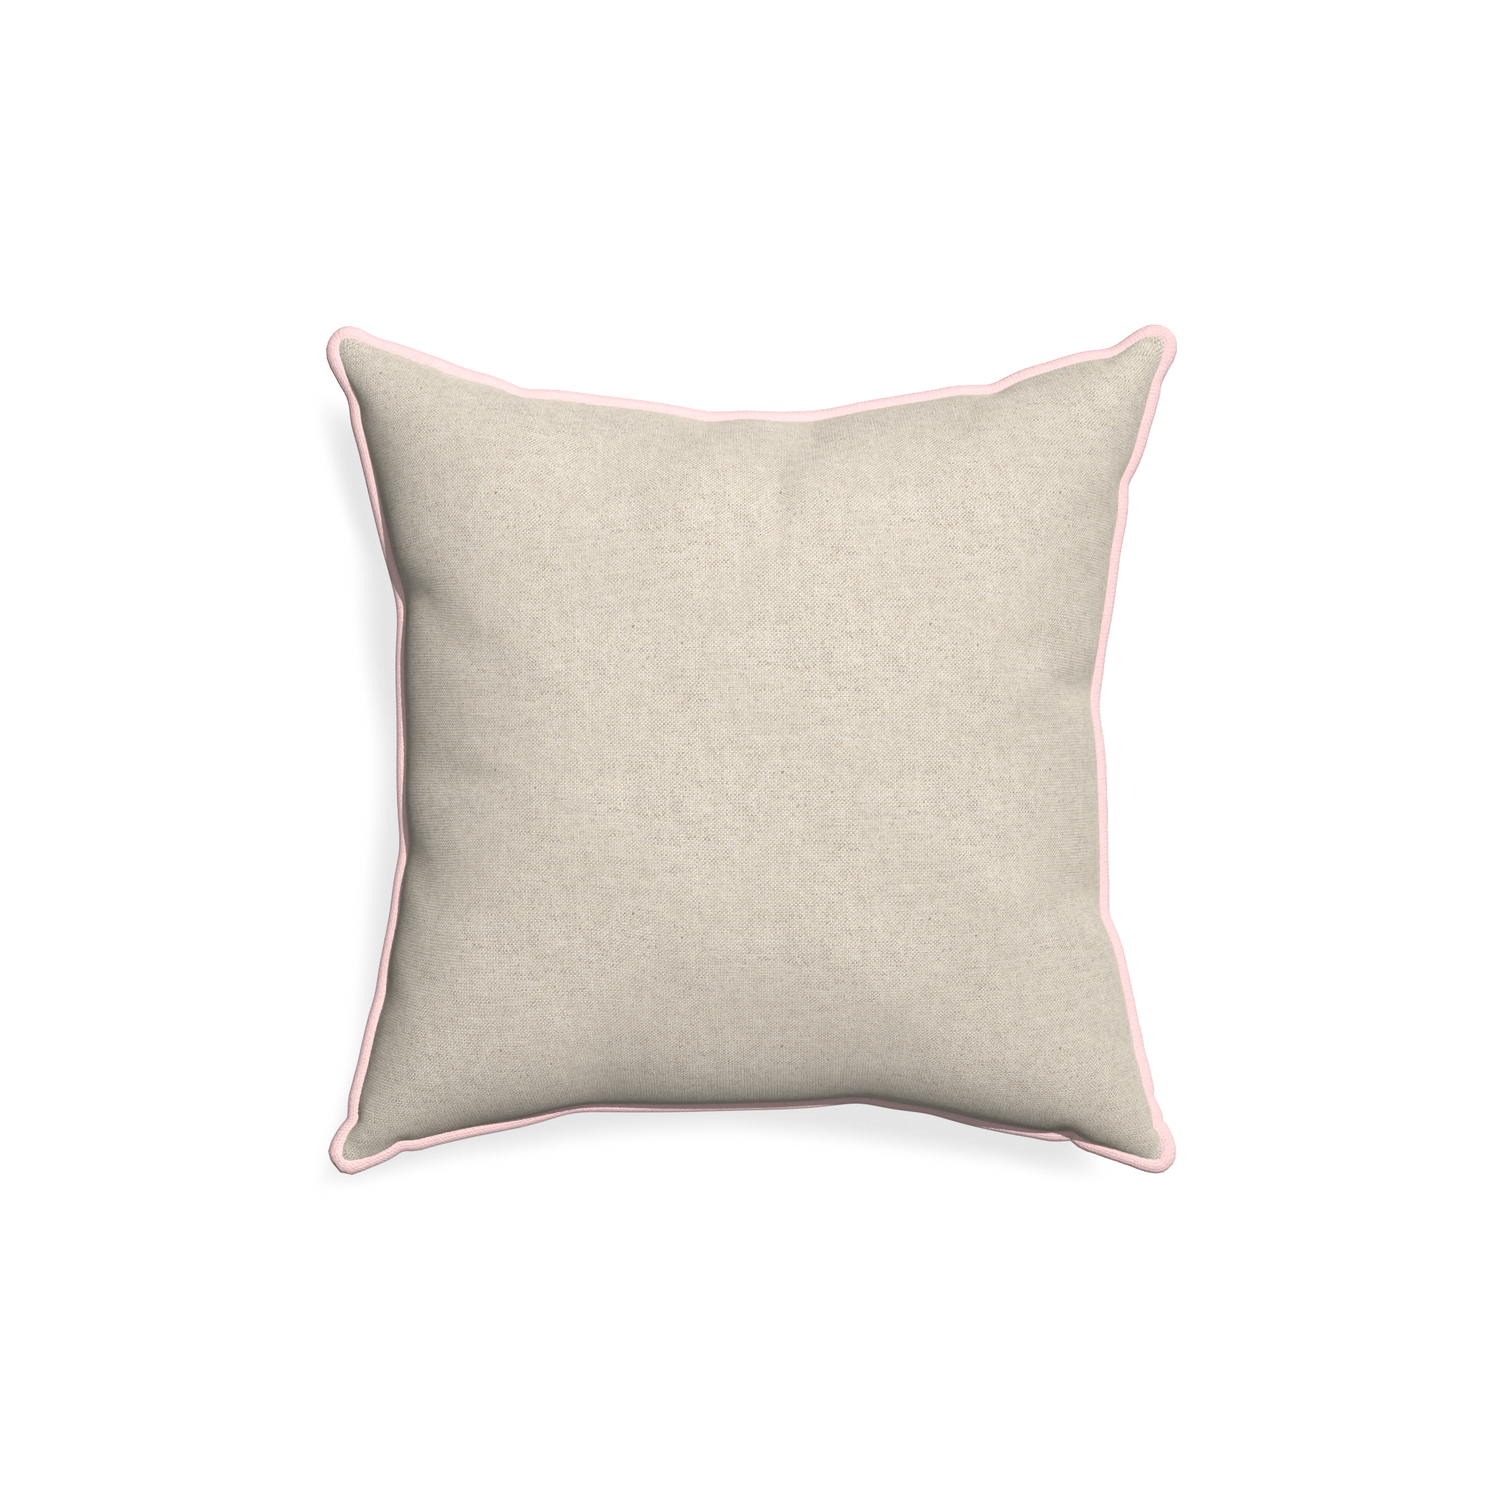 18-square oat custom pillow with petal piping on white background